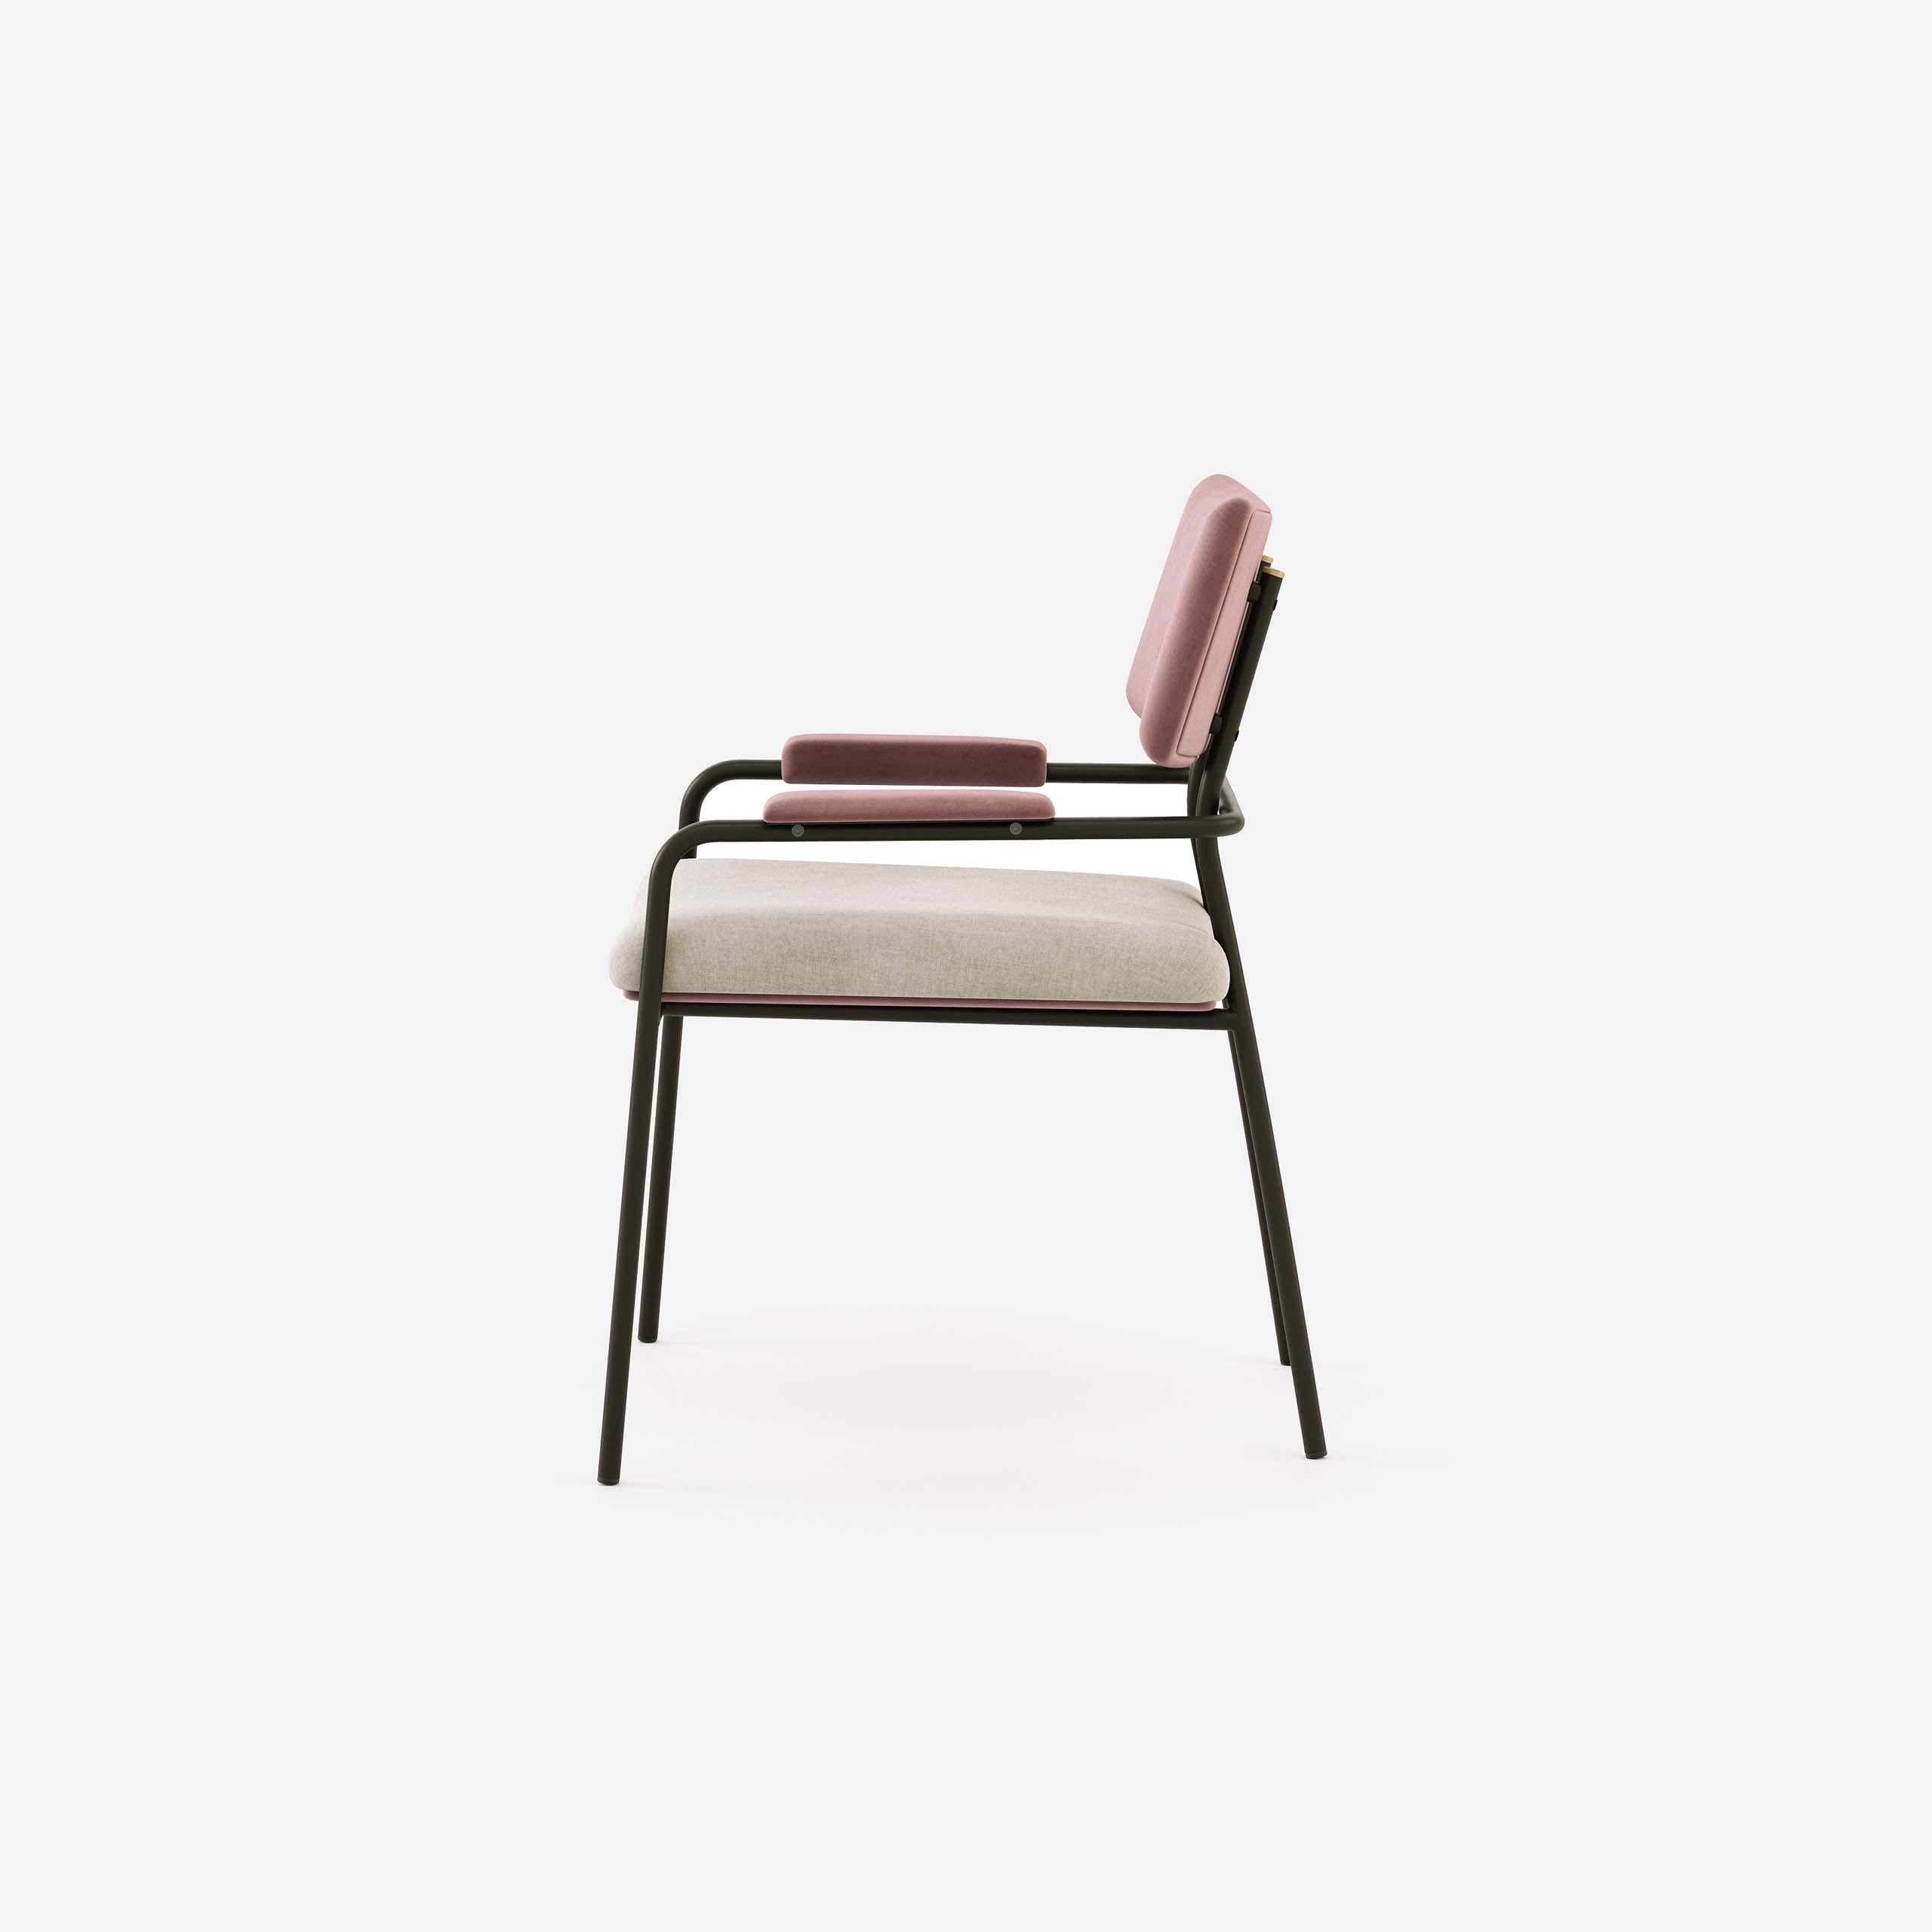 Fully upholstered dining chair combining different materials and textures.
Measures: L 670 x D 650 x H 910 x SH 480 mm
L 26.78 x D 25.59 x H 35.83 x SH 18.90 in
Fabric structure: Cotton Velvet Siége 0157 Bronze Mist
Structure: Black Texturized Steel